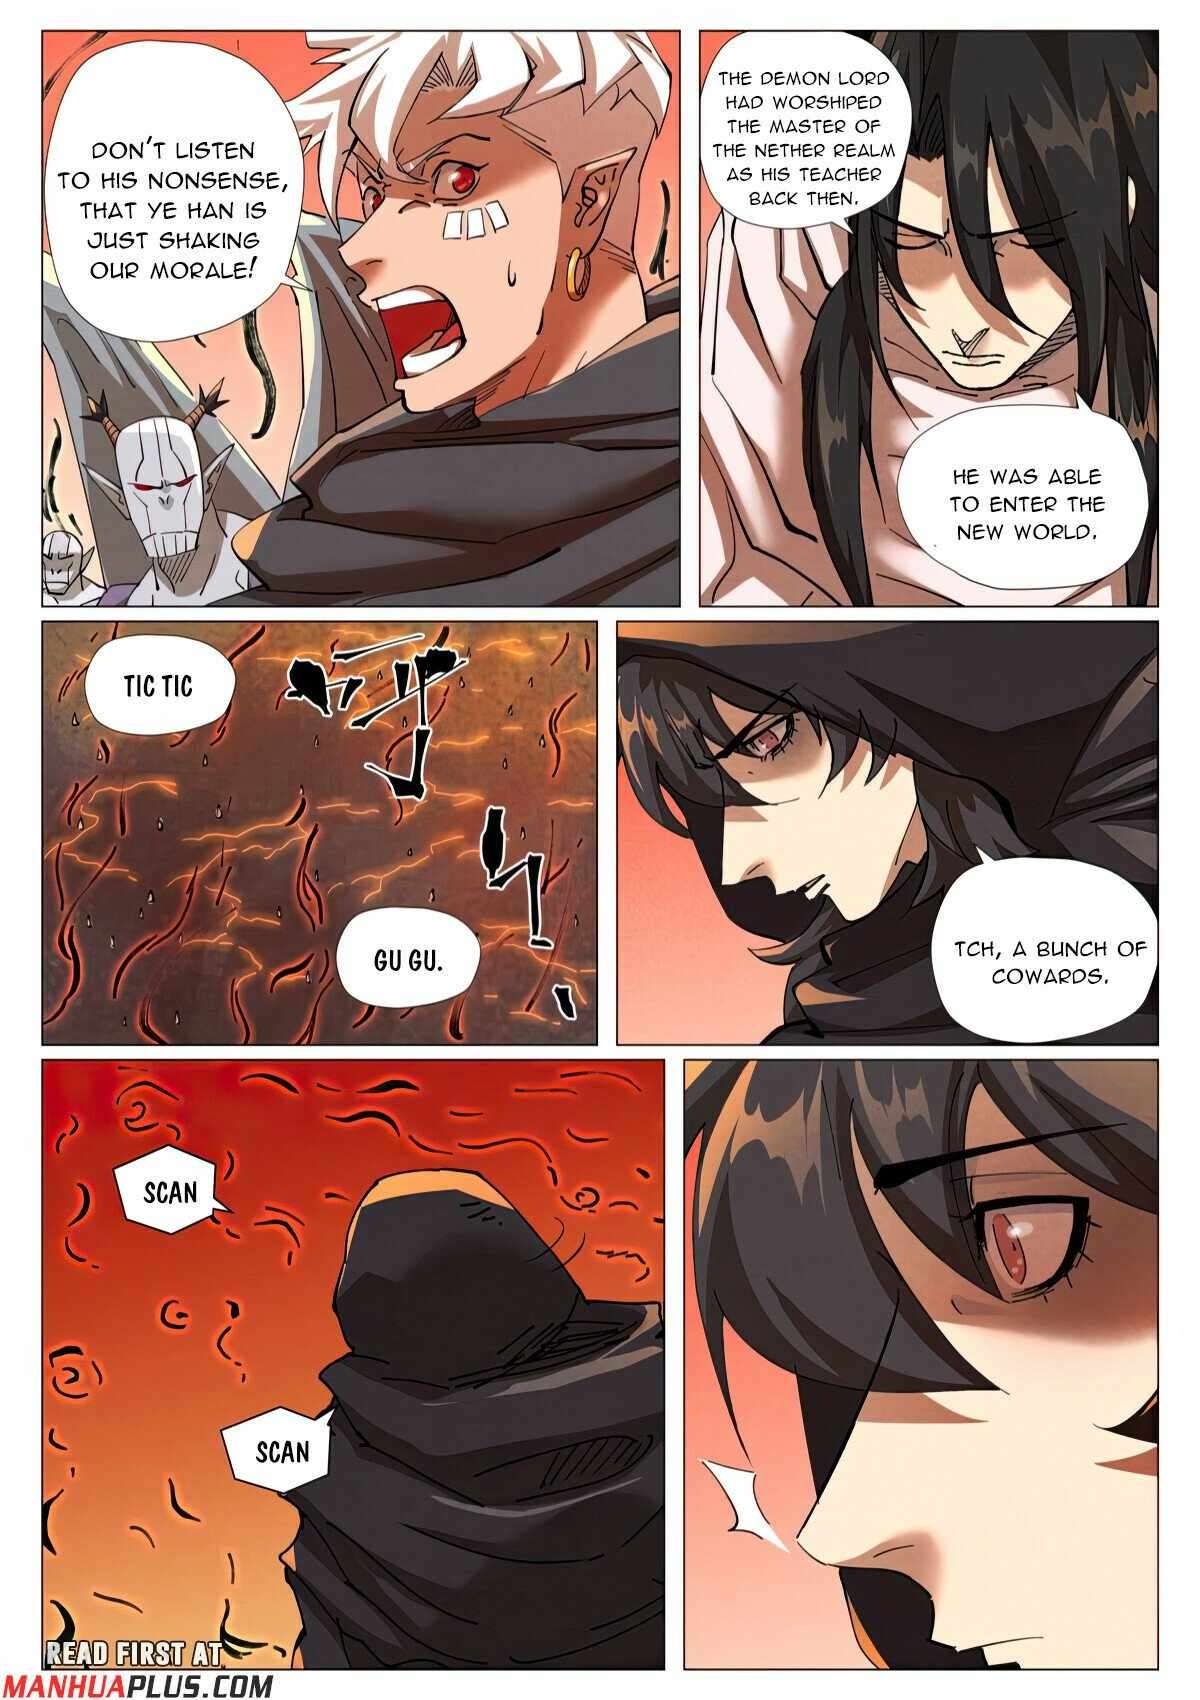 Tales of Demons and Gods Manhua - chapter 464.6 - #6